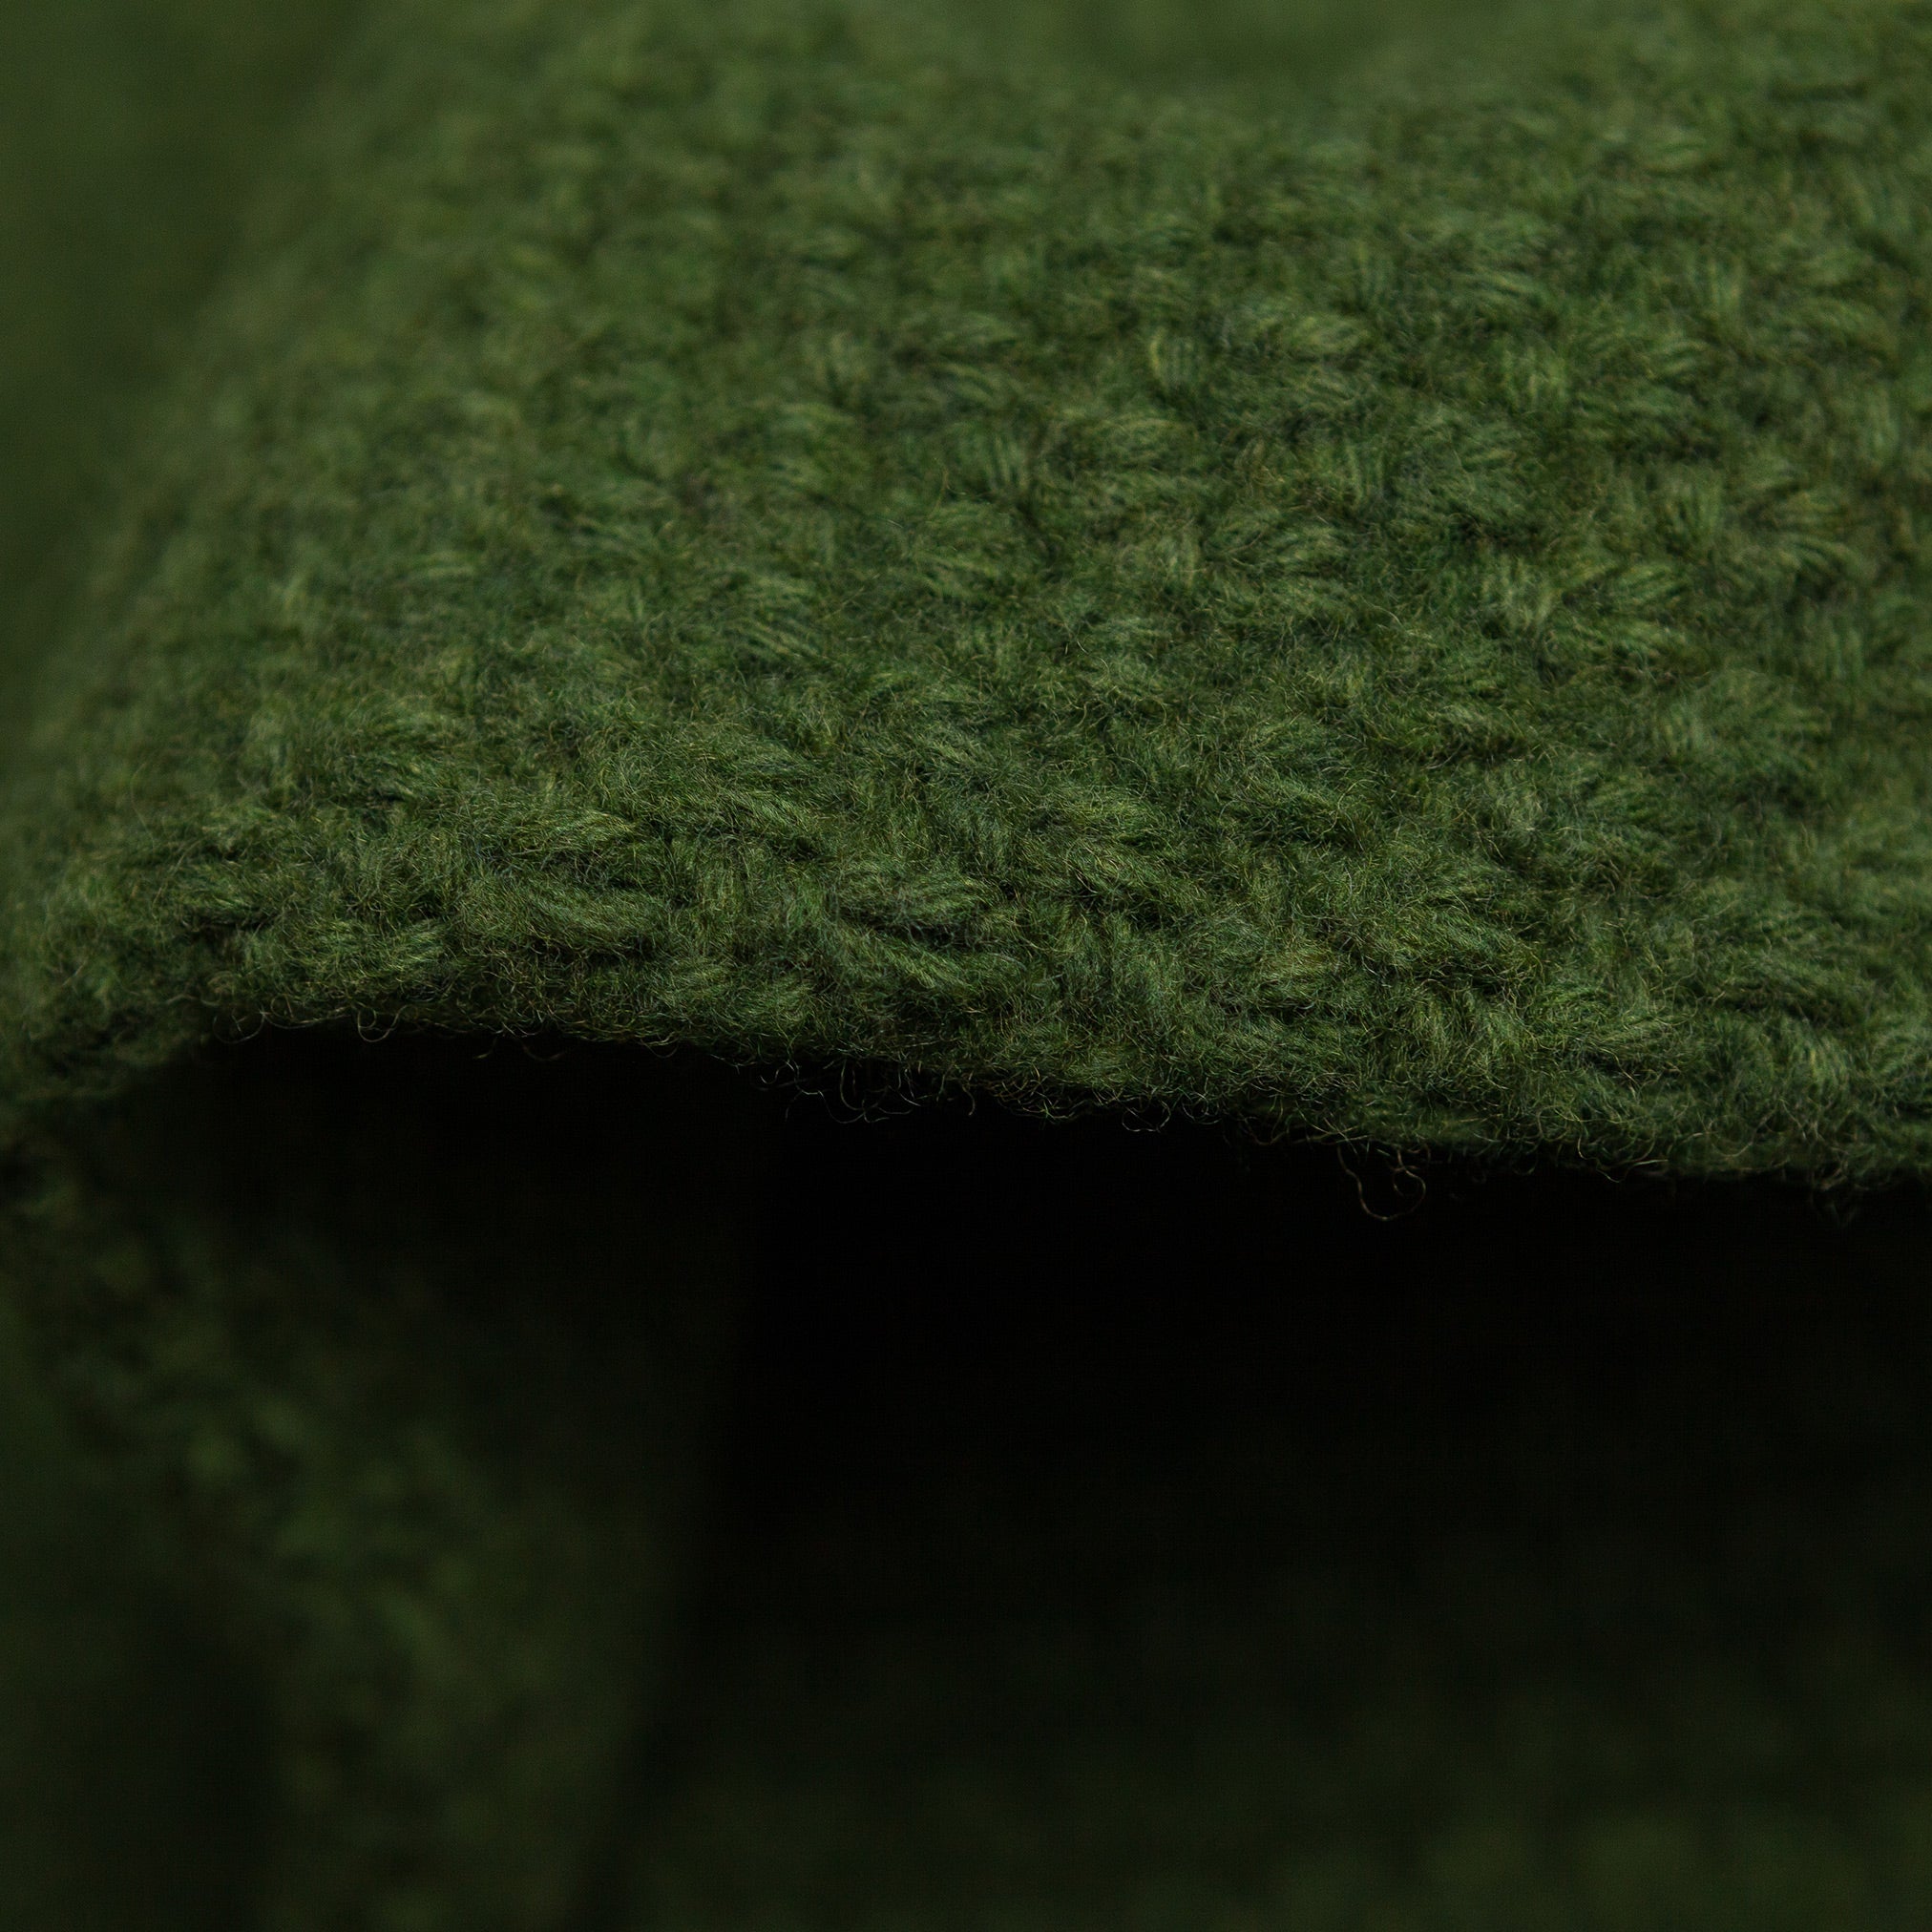 Dolcevita Sweater in Forest Green